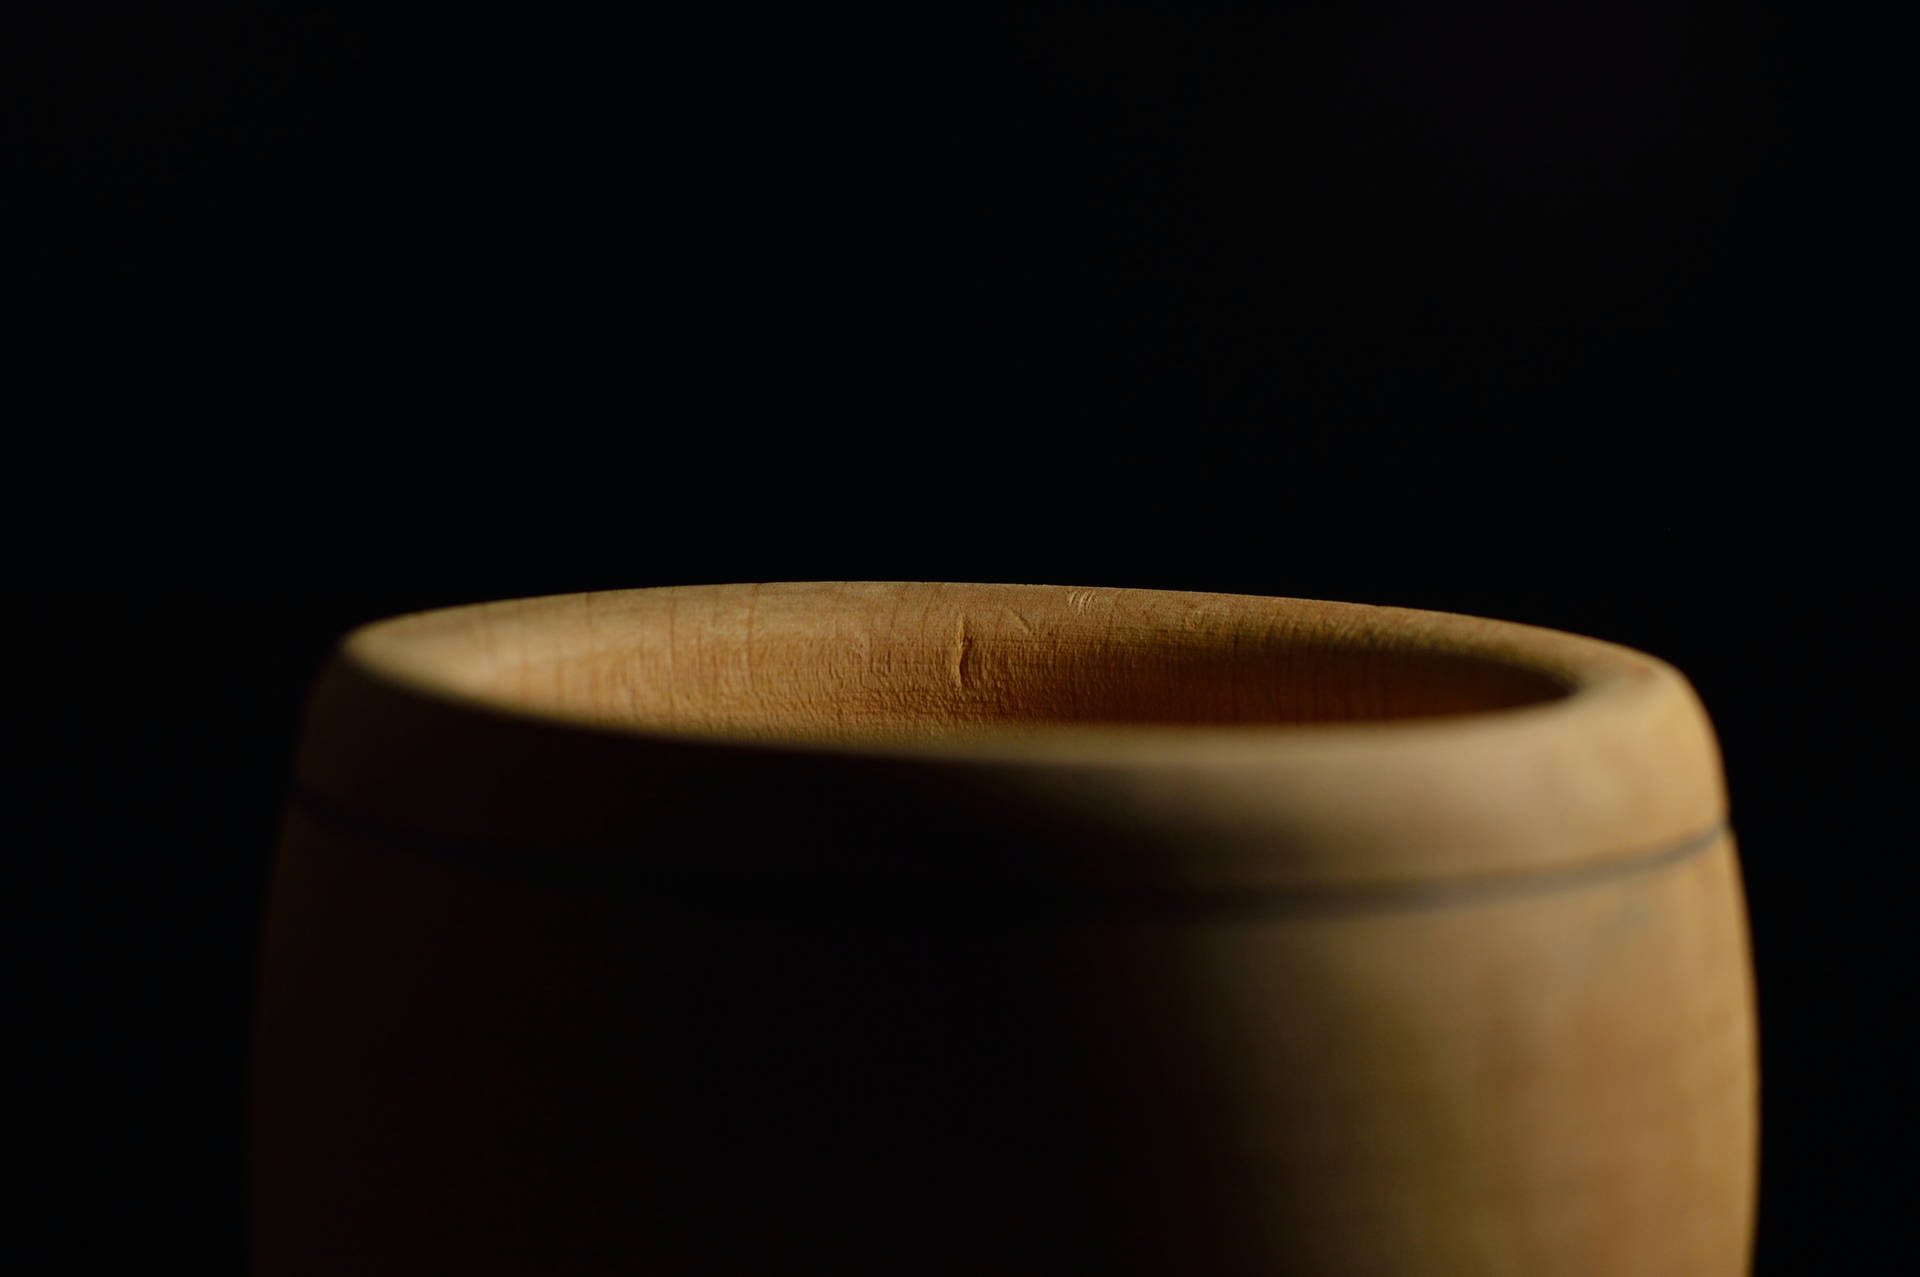 Clay Bowl In Black Background